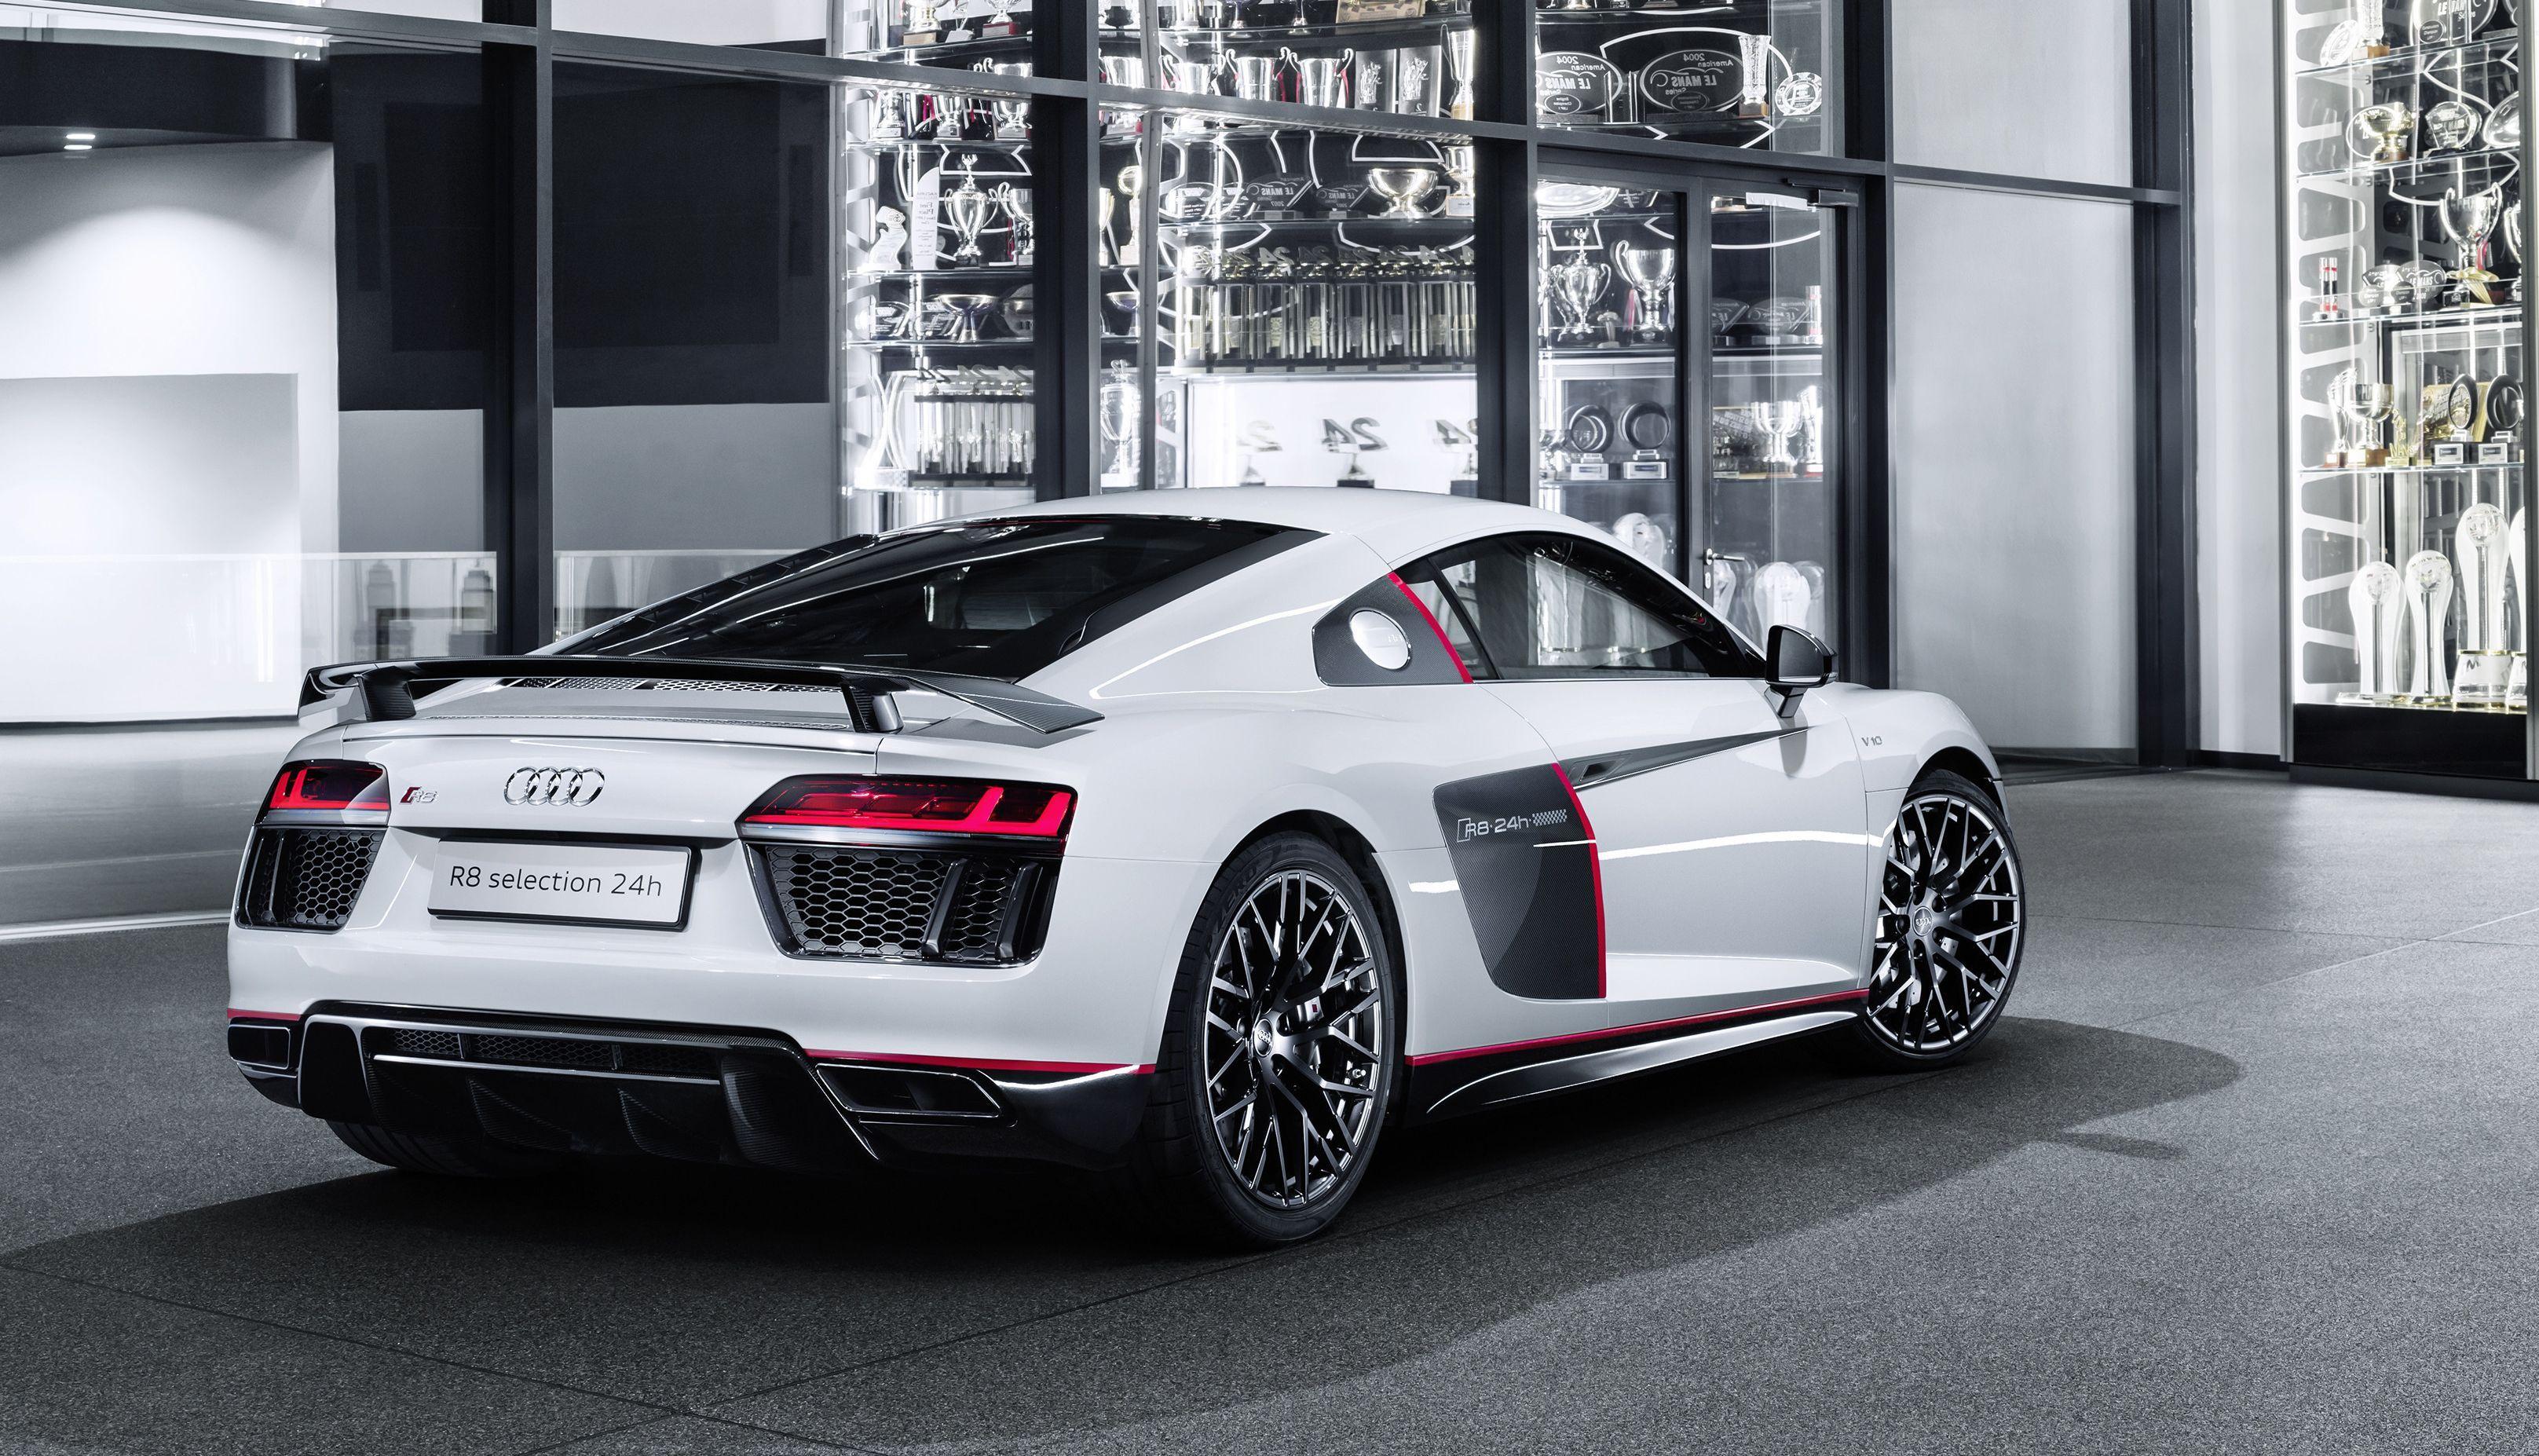 Audi R8 Coupe V10 Plus Selection 24h Edition 2 (2017) new wallpaper